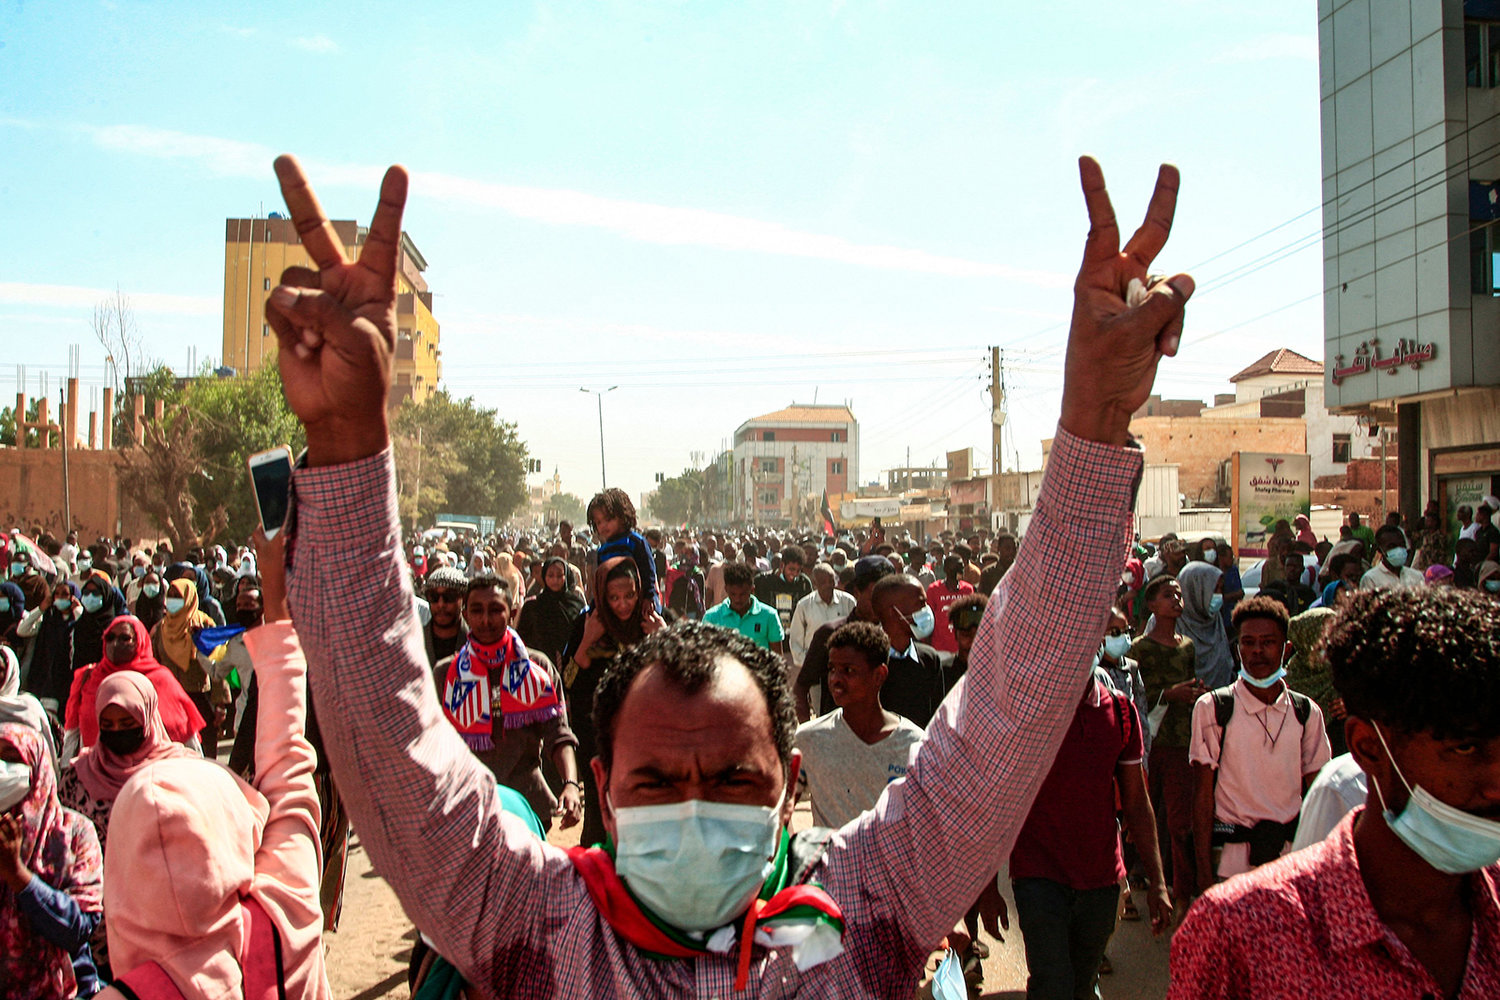 Sudanese protesters gather during a demonstration against the Oct. 25 coup, in the capital Khartoum, on Jan. 2, 2022. (-/AFP via Getty Images/TNS)